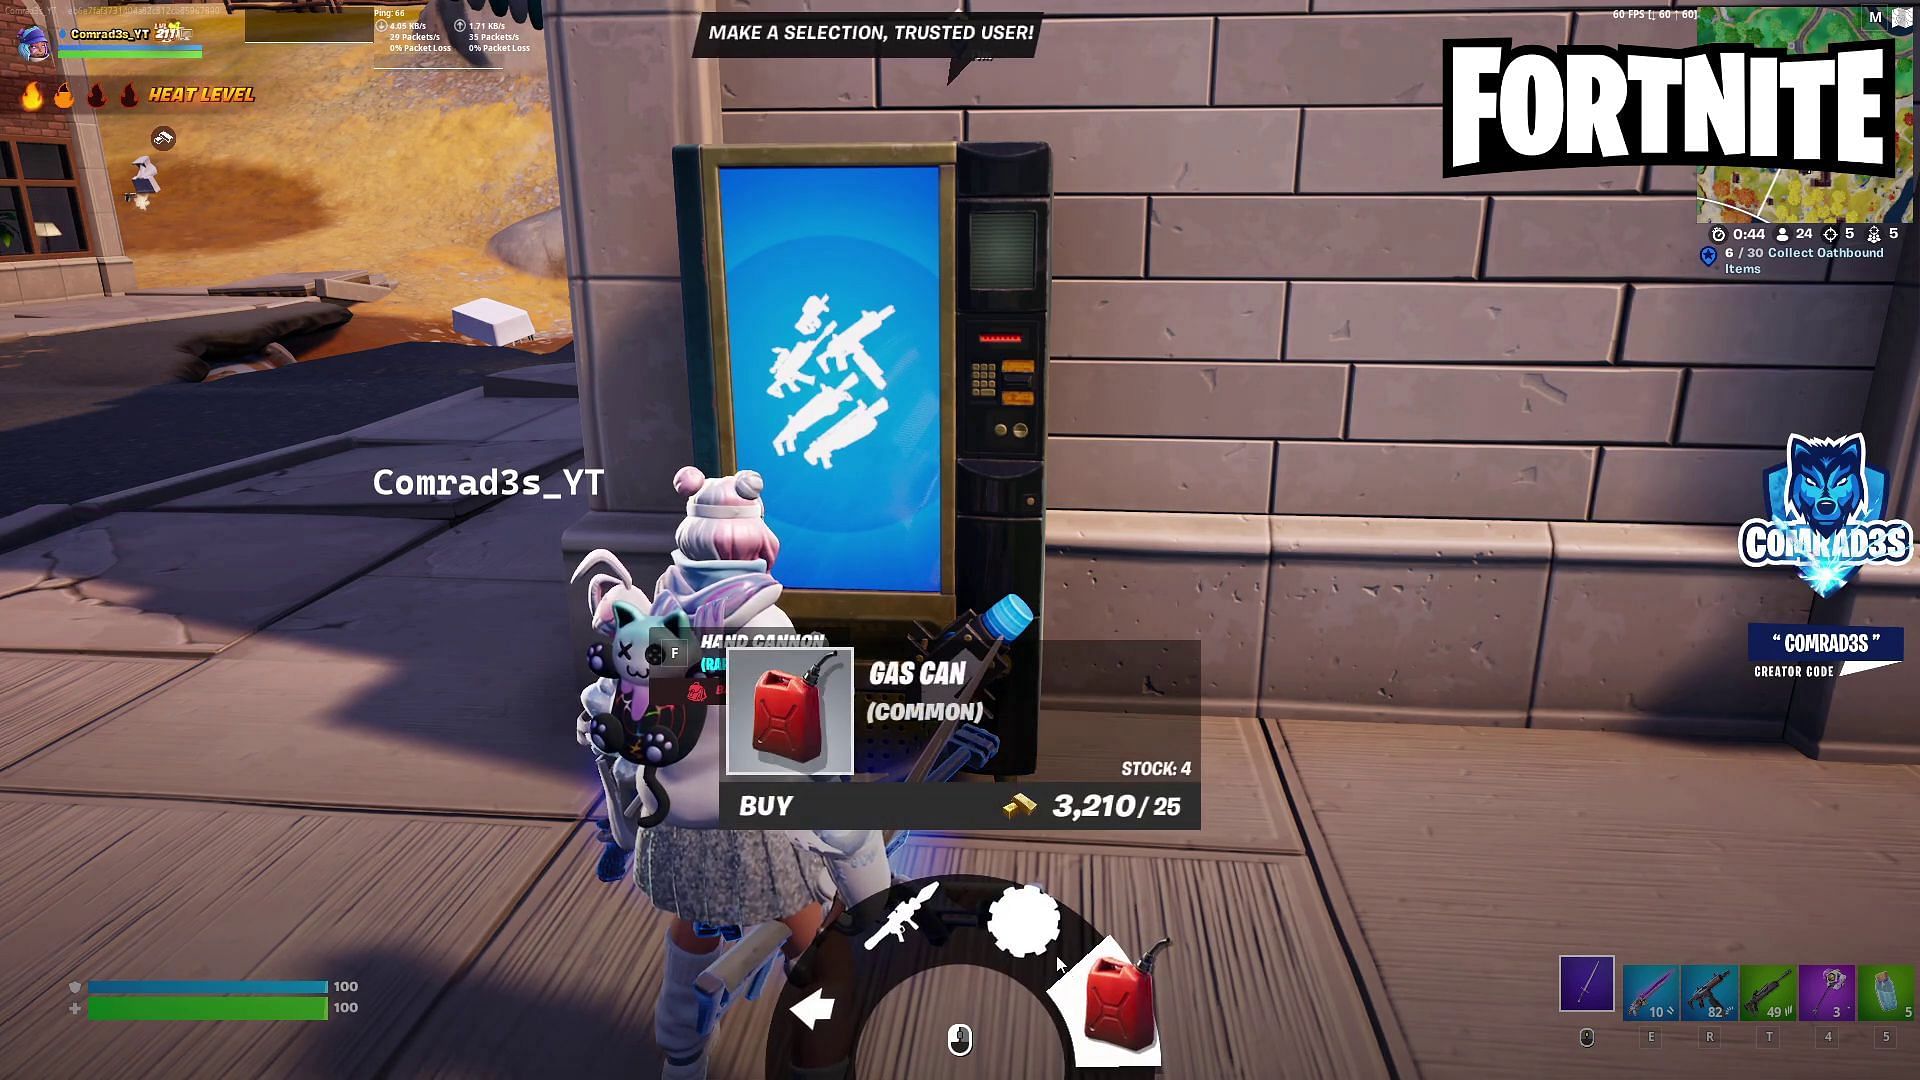 Purchase weapons from Vending Machines to easily complete the quest (Image via YouTube/Comrad3s)